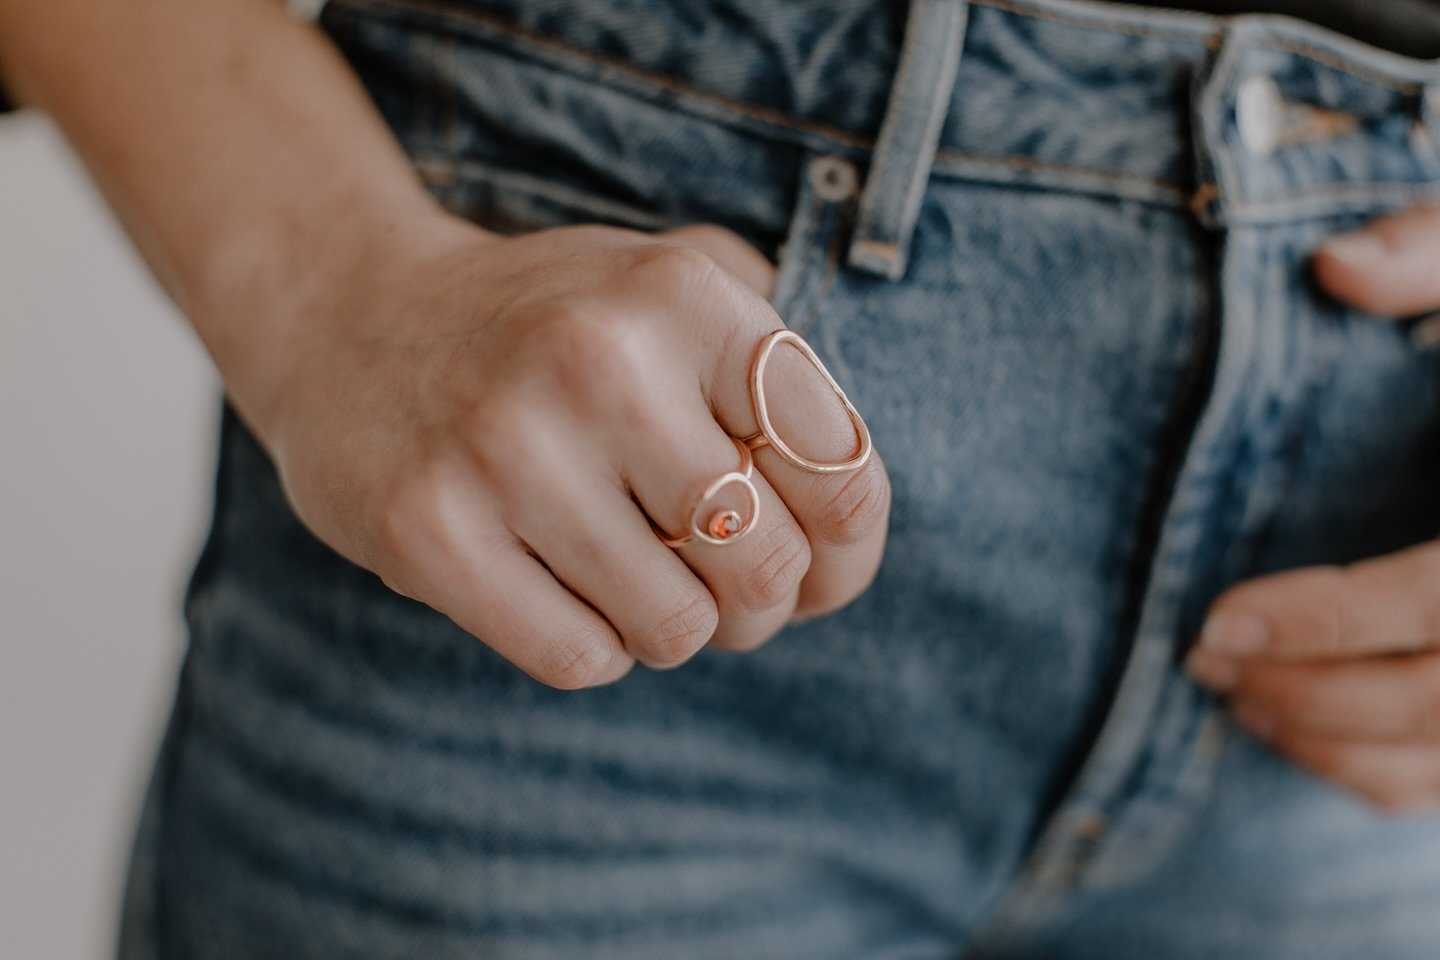 Elevate any outfit with pieces from Gem &amp; Blue, here featuring our Cirque Ring and Ona Ring. Shop now! 

#jewelry #ring #rings #goldrings #silverrings #handcrafted #handcraftedjewelry #minimalist #minimalistjewelry #denver #denvercolorado #gemand